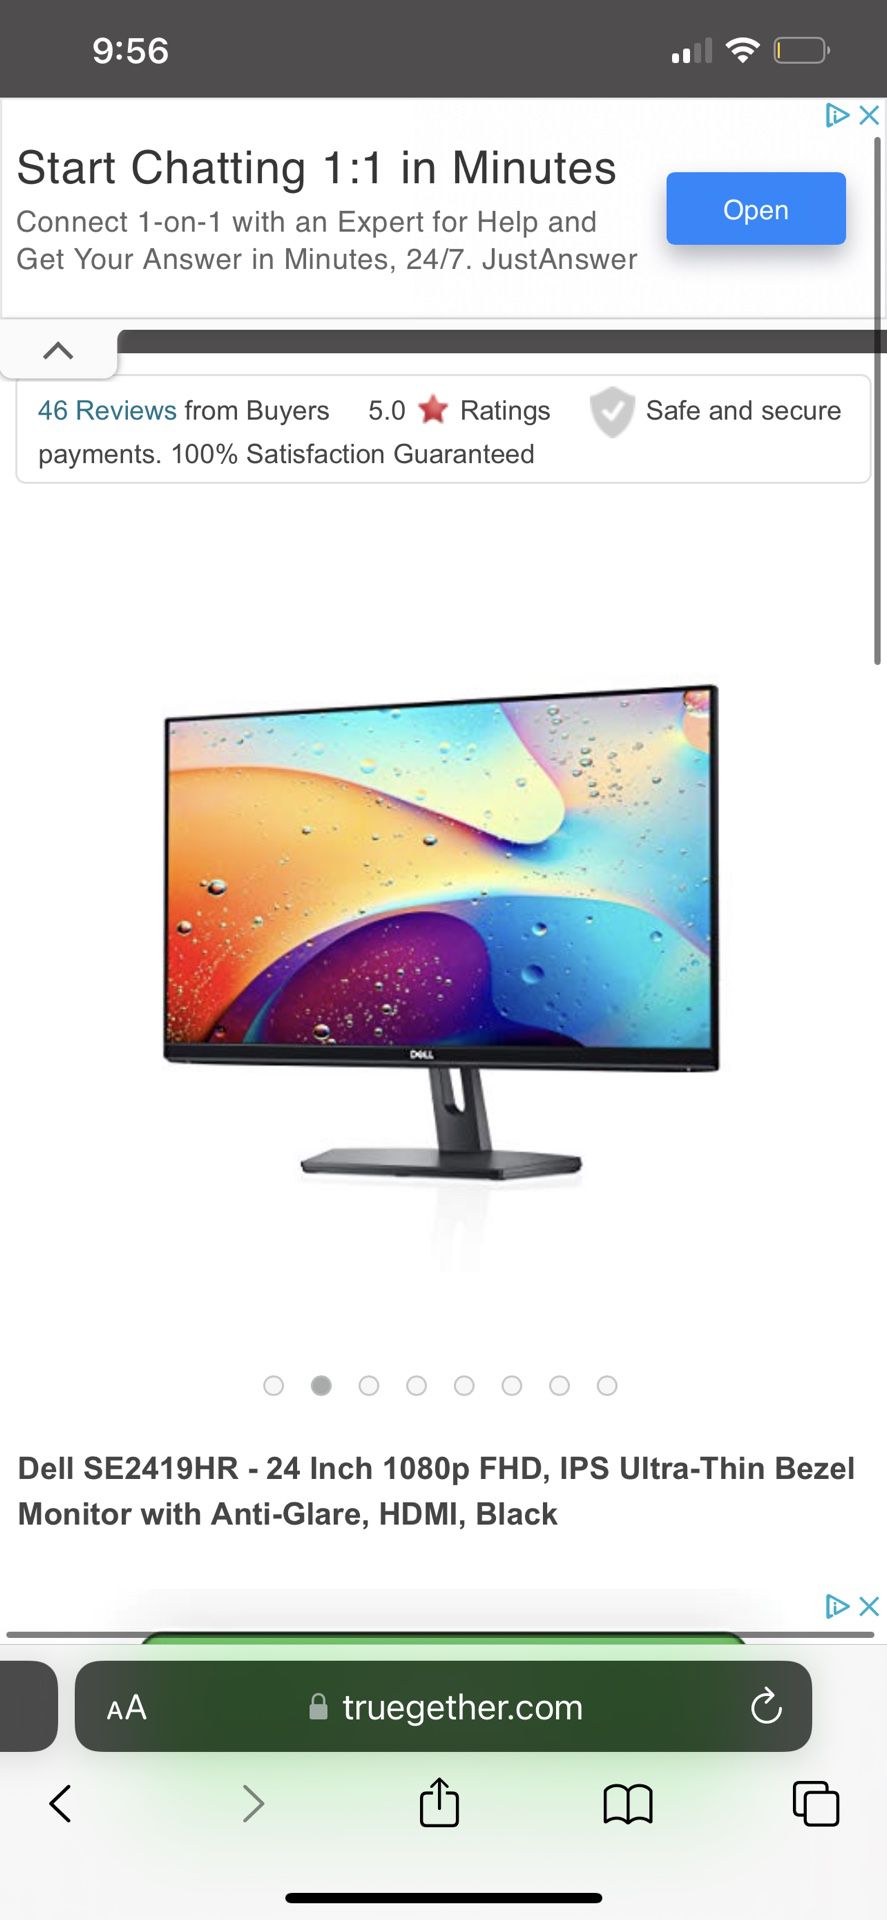 Dell SE2419HR 24 Inch 1080p FHD, IPS Ultra-Thin Bezel Monitor with Anti- Glare, HDMI, Black for Sale in Houston, TX OfferUp